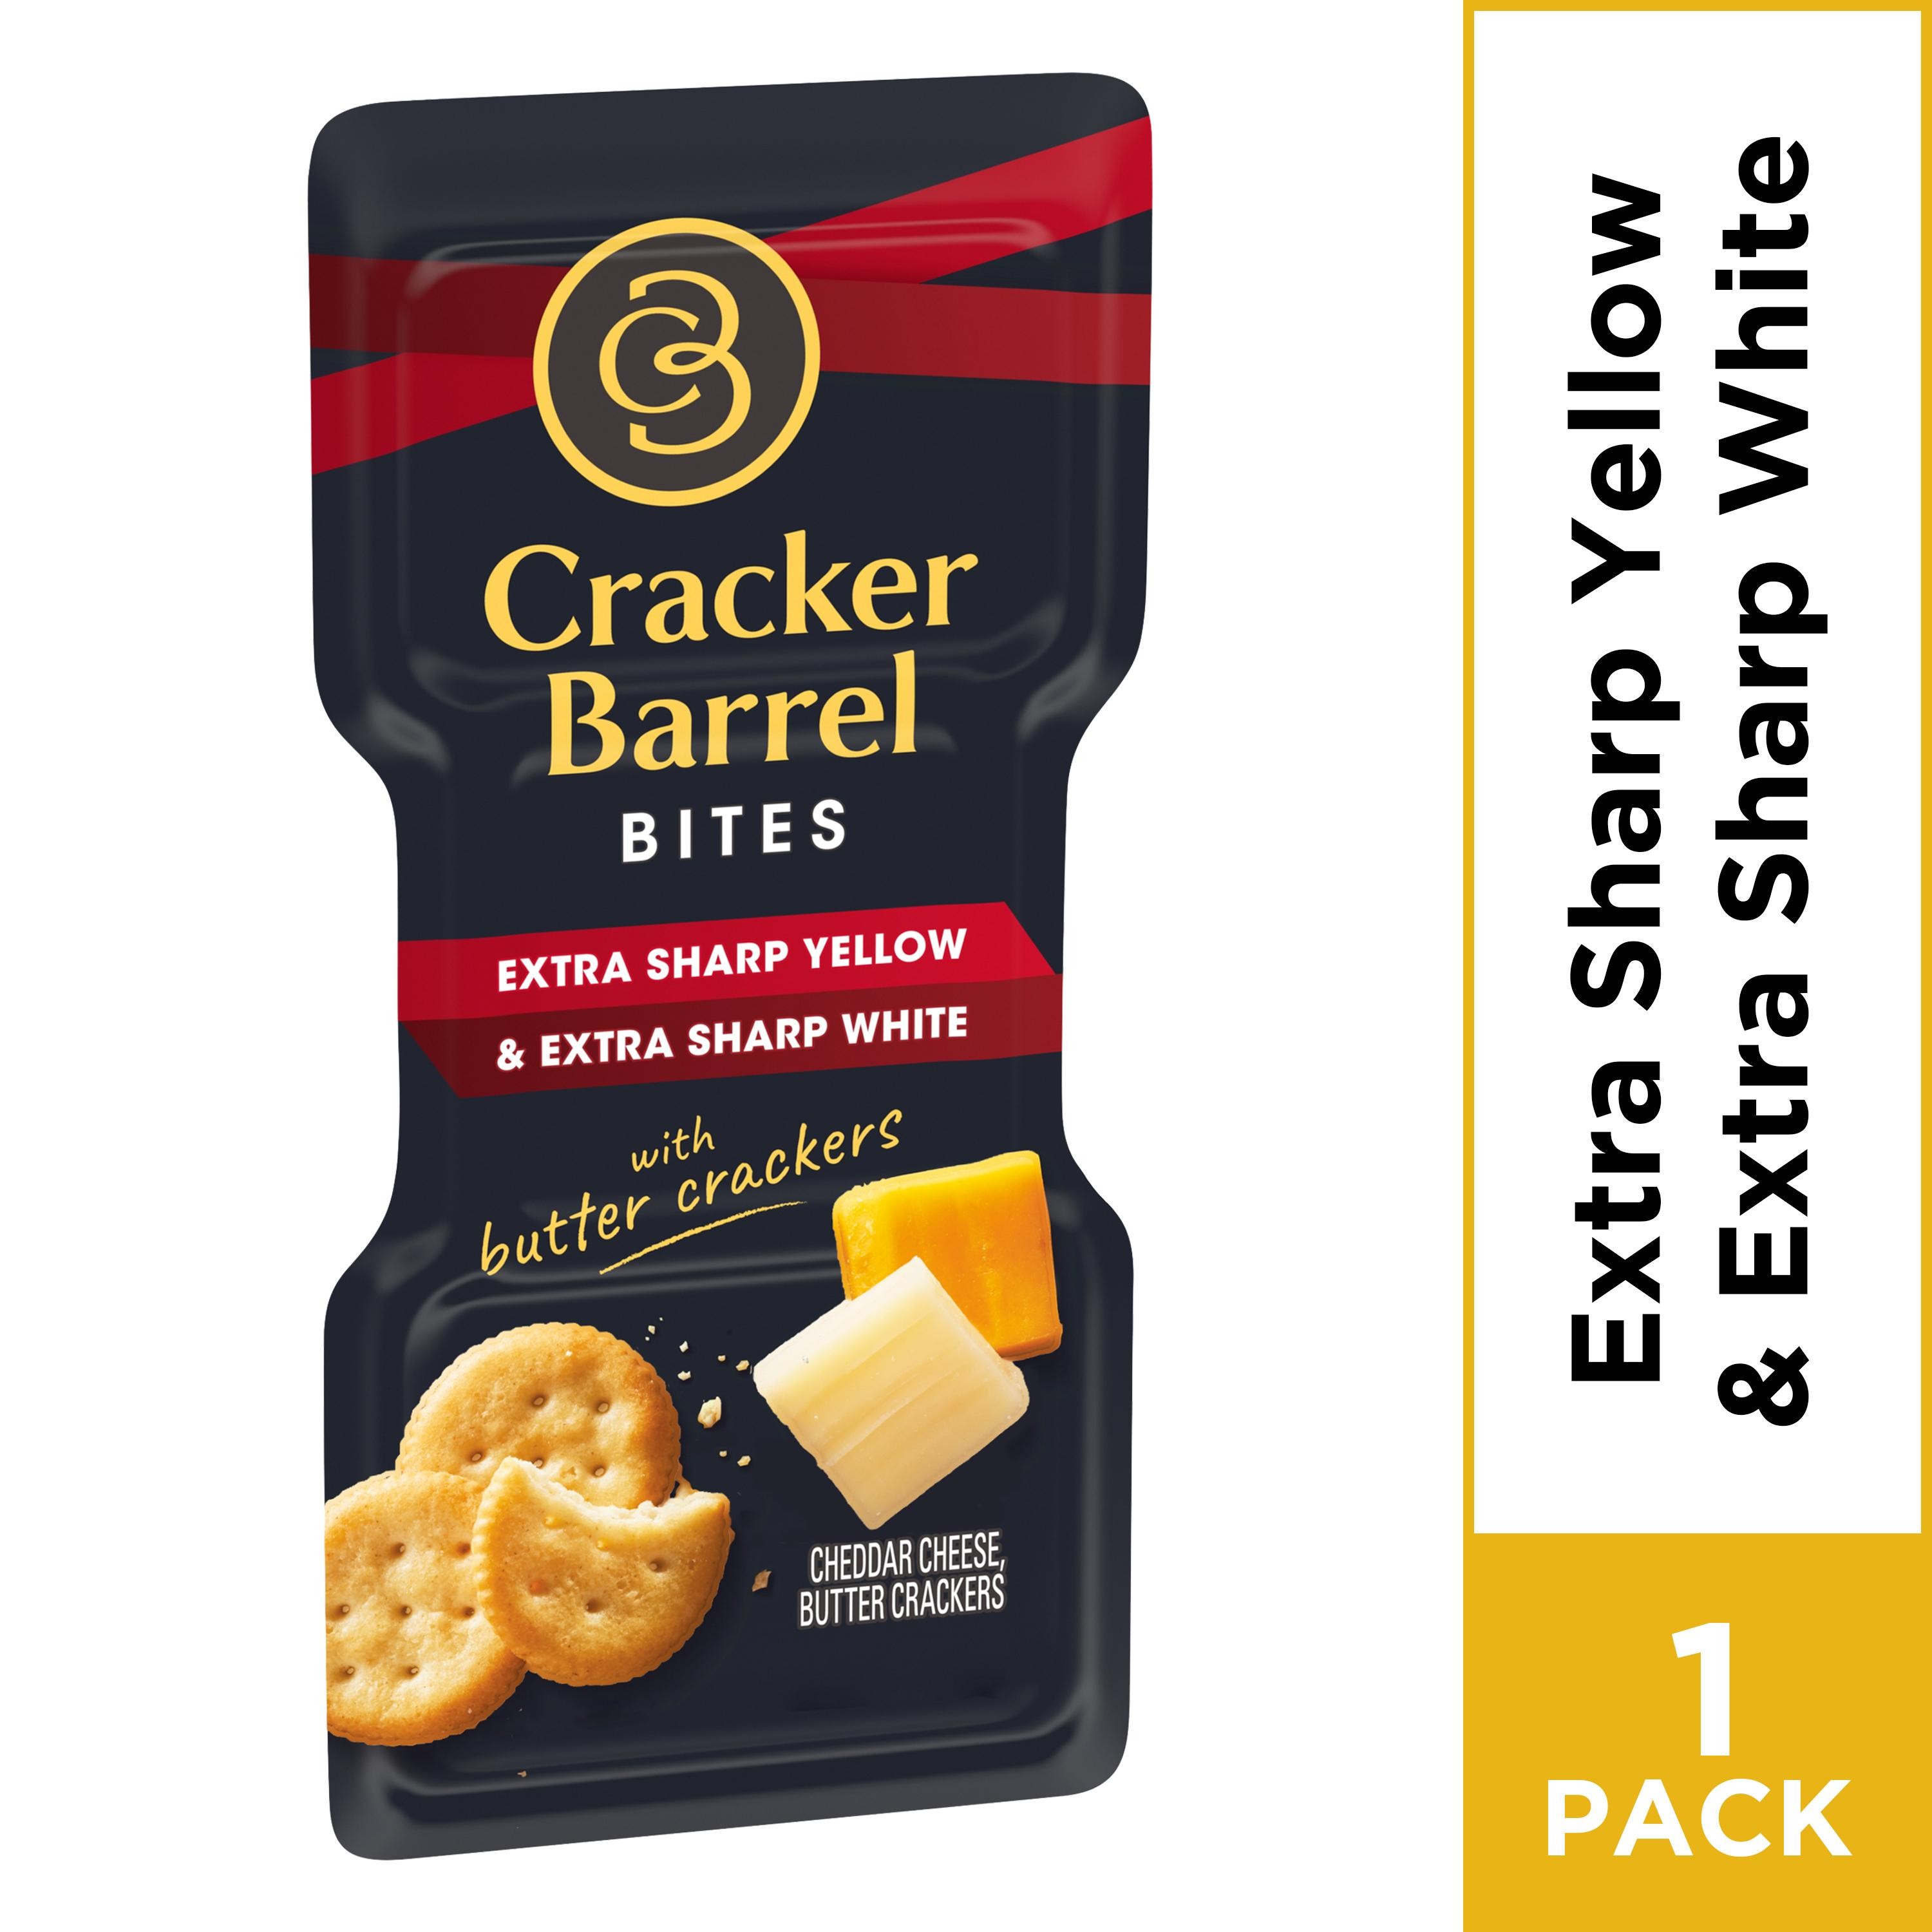 Cracker Barrel Bites, Extra Sharp White & Yellow Cheddar Cheese With Crackers - 1.58 Oz